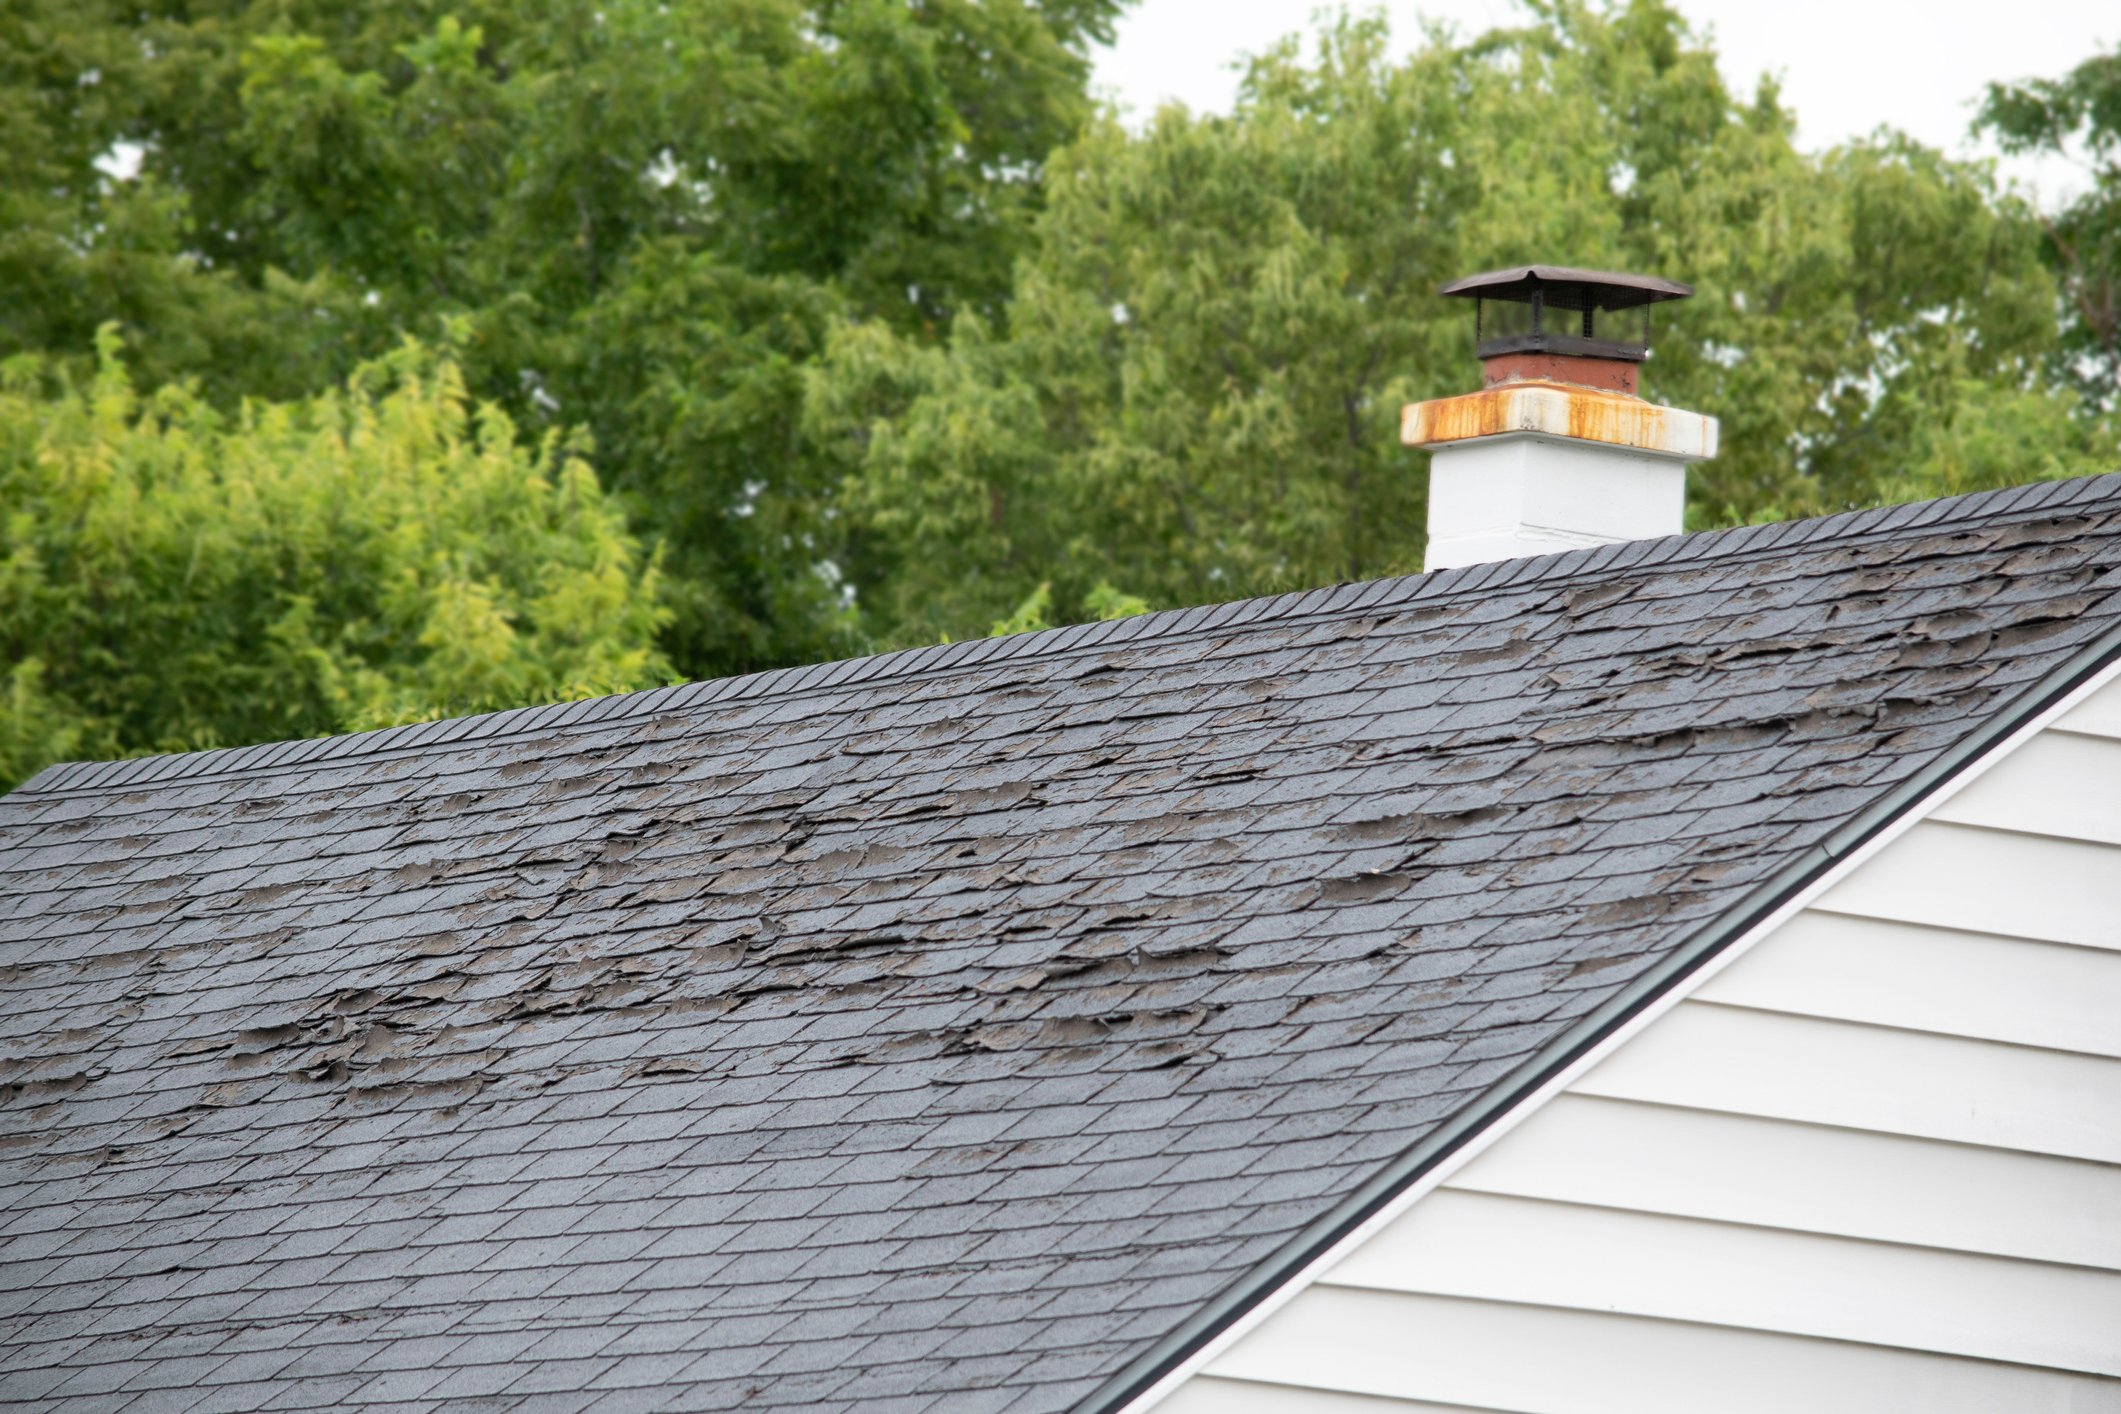 Worn Roof - Is it Time to Replace Your Roof